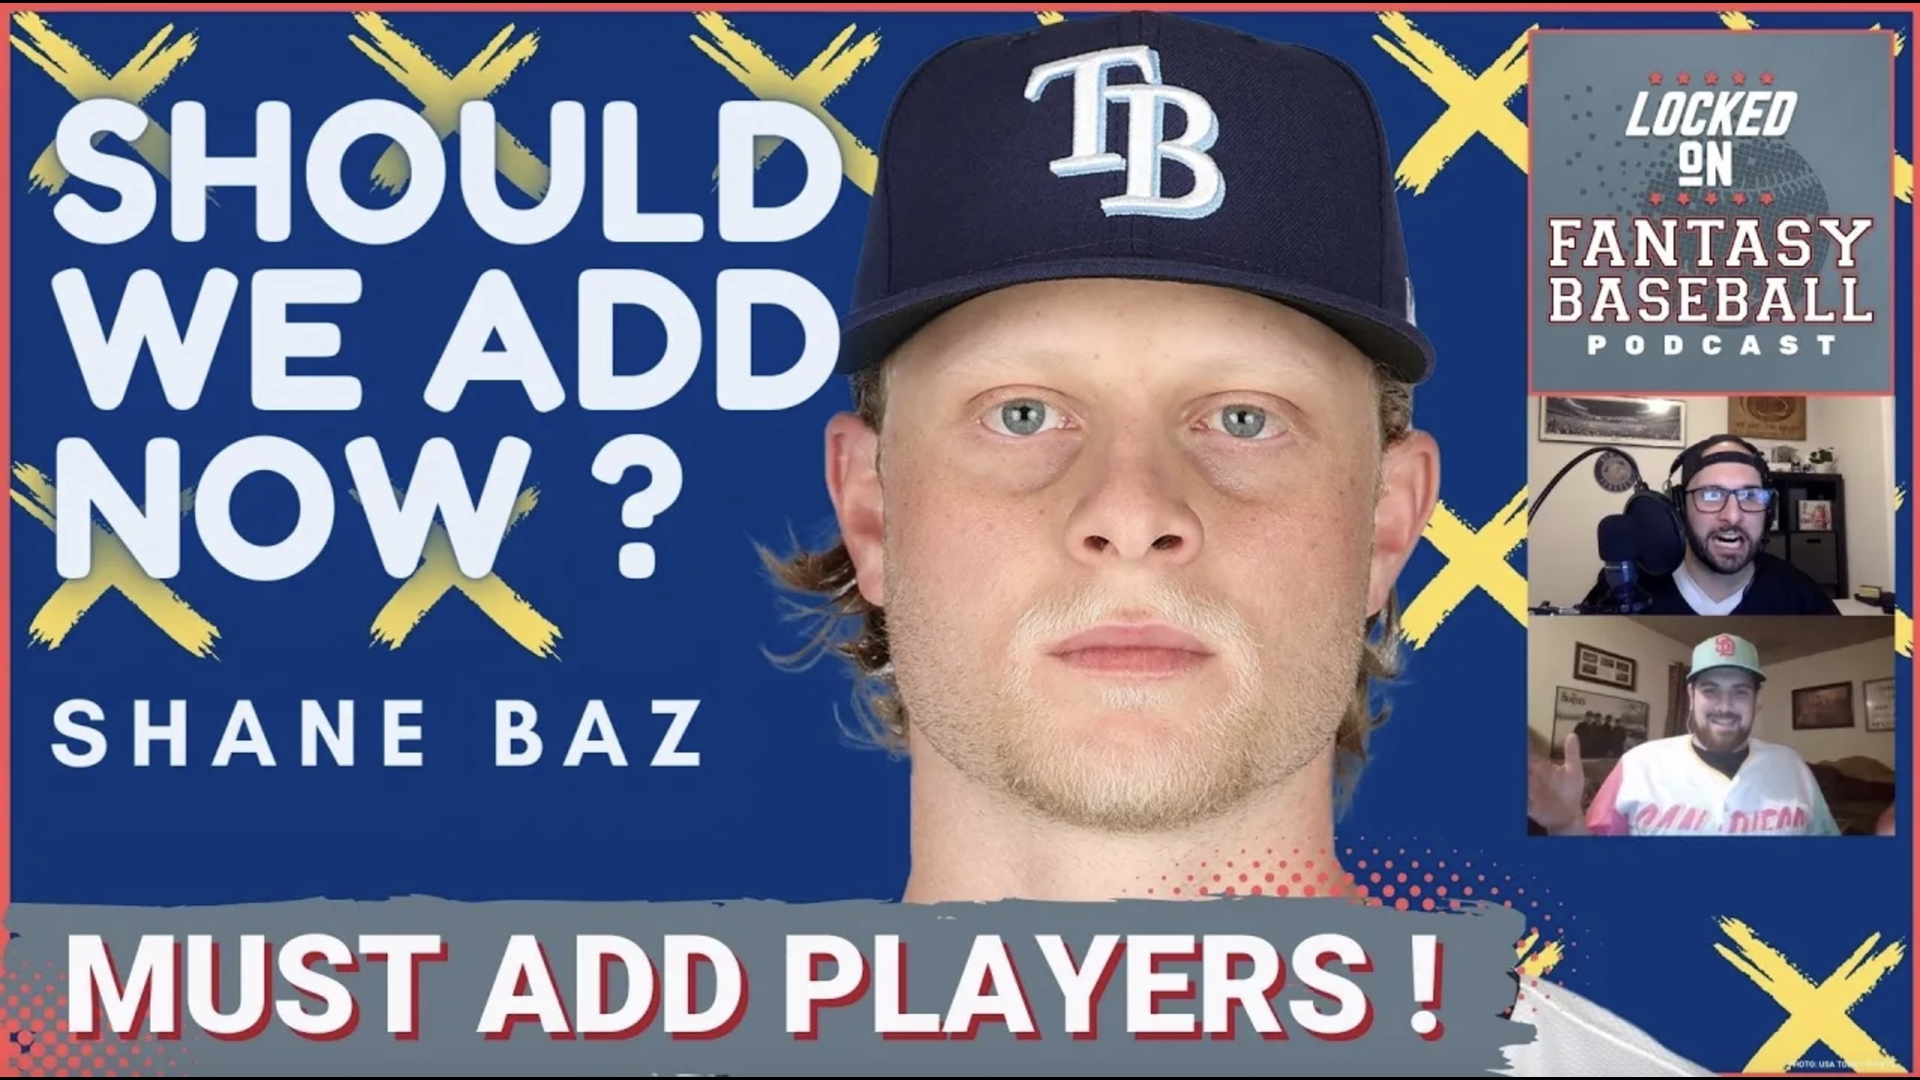 Locked On Fantasy Baseball Is Making Sure You Know Which Players To Add to start your week off right ! With Players Like Kyle Manzardo &James Paxton !